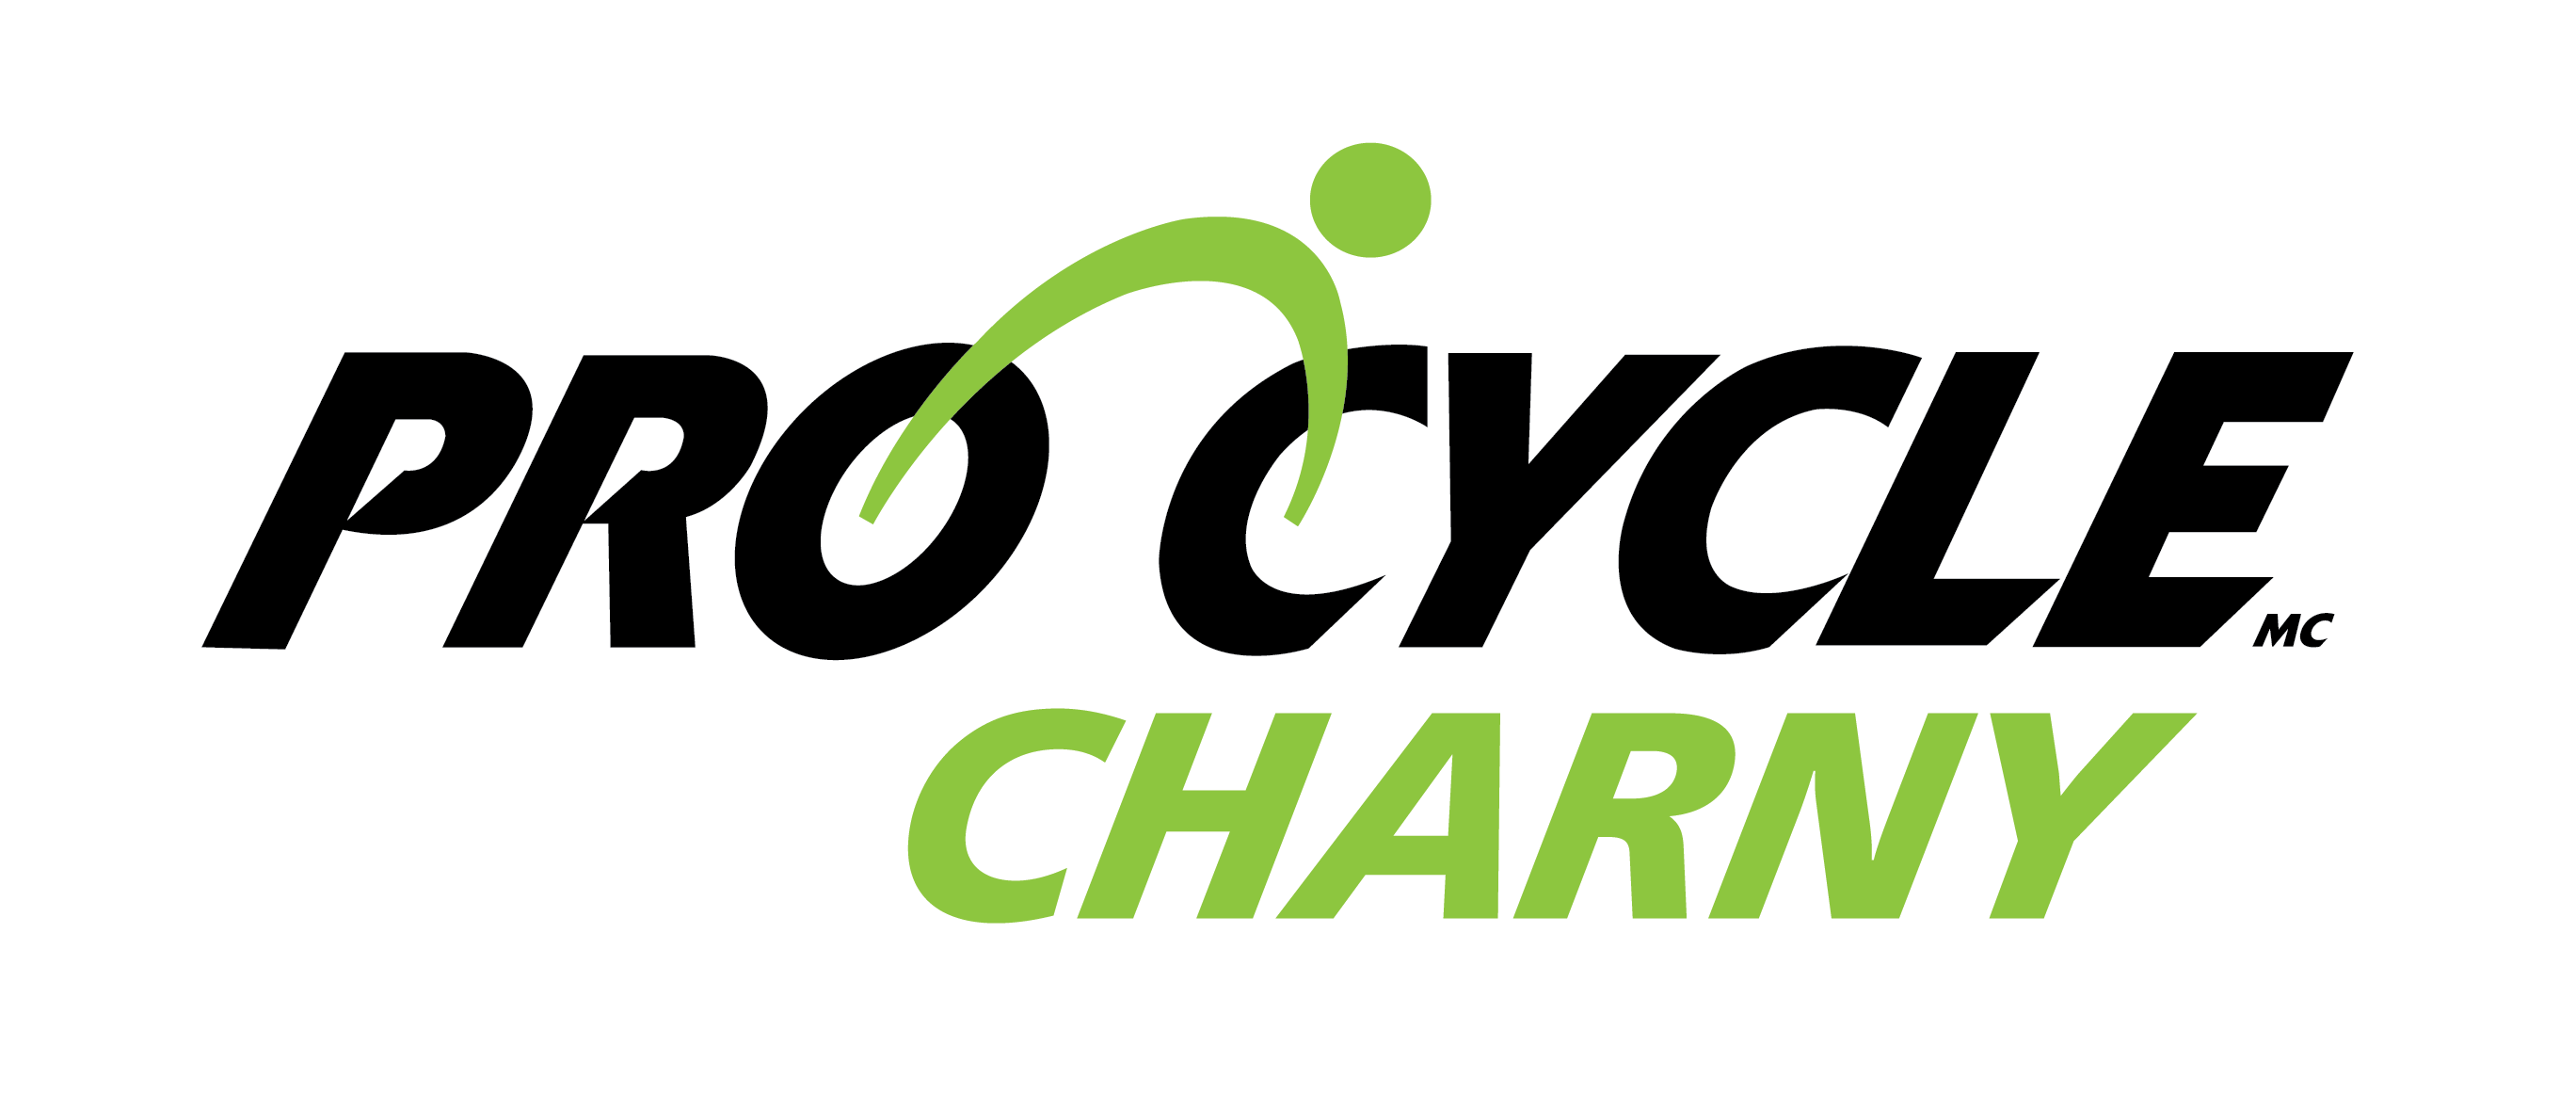 Procycle Charny